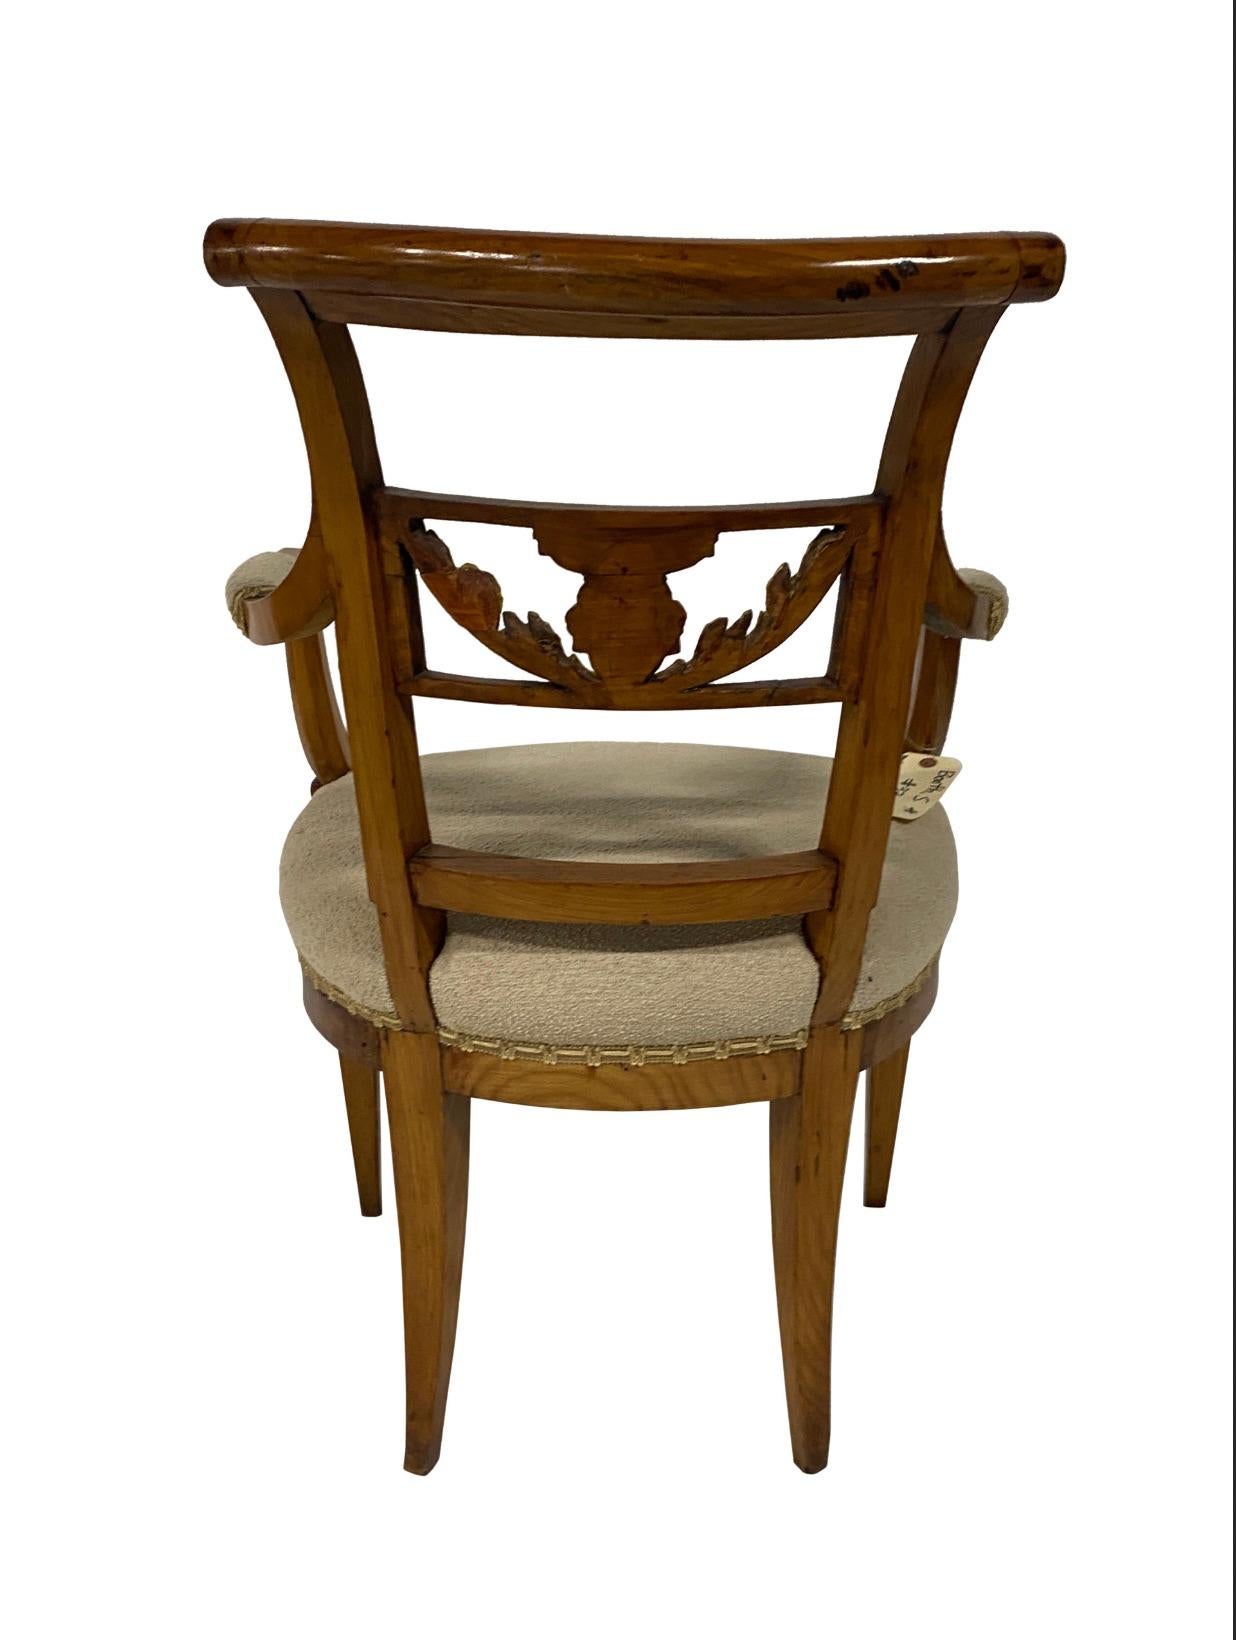 19th Century French Empire Mahogany Armchairs In Good Condition For Sale In Sag Harbor, NY